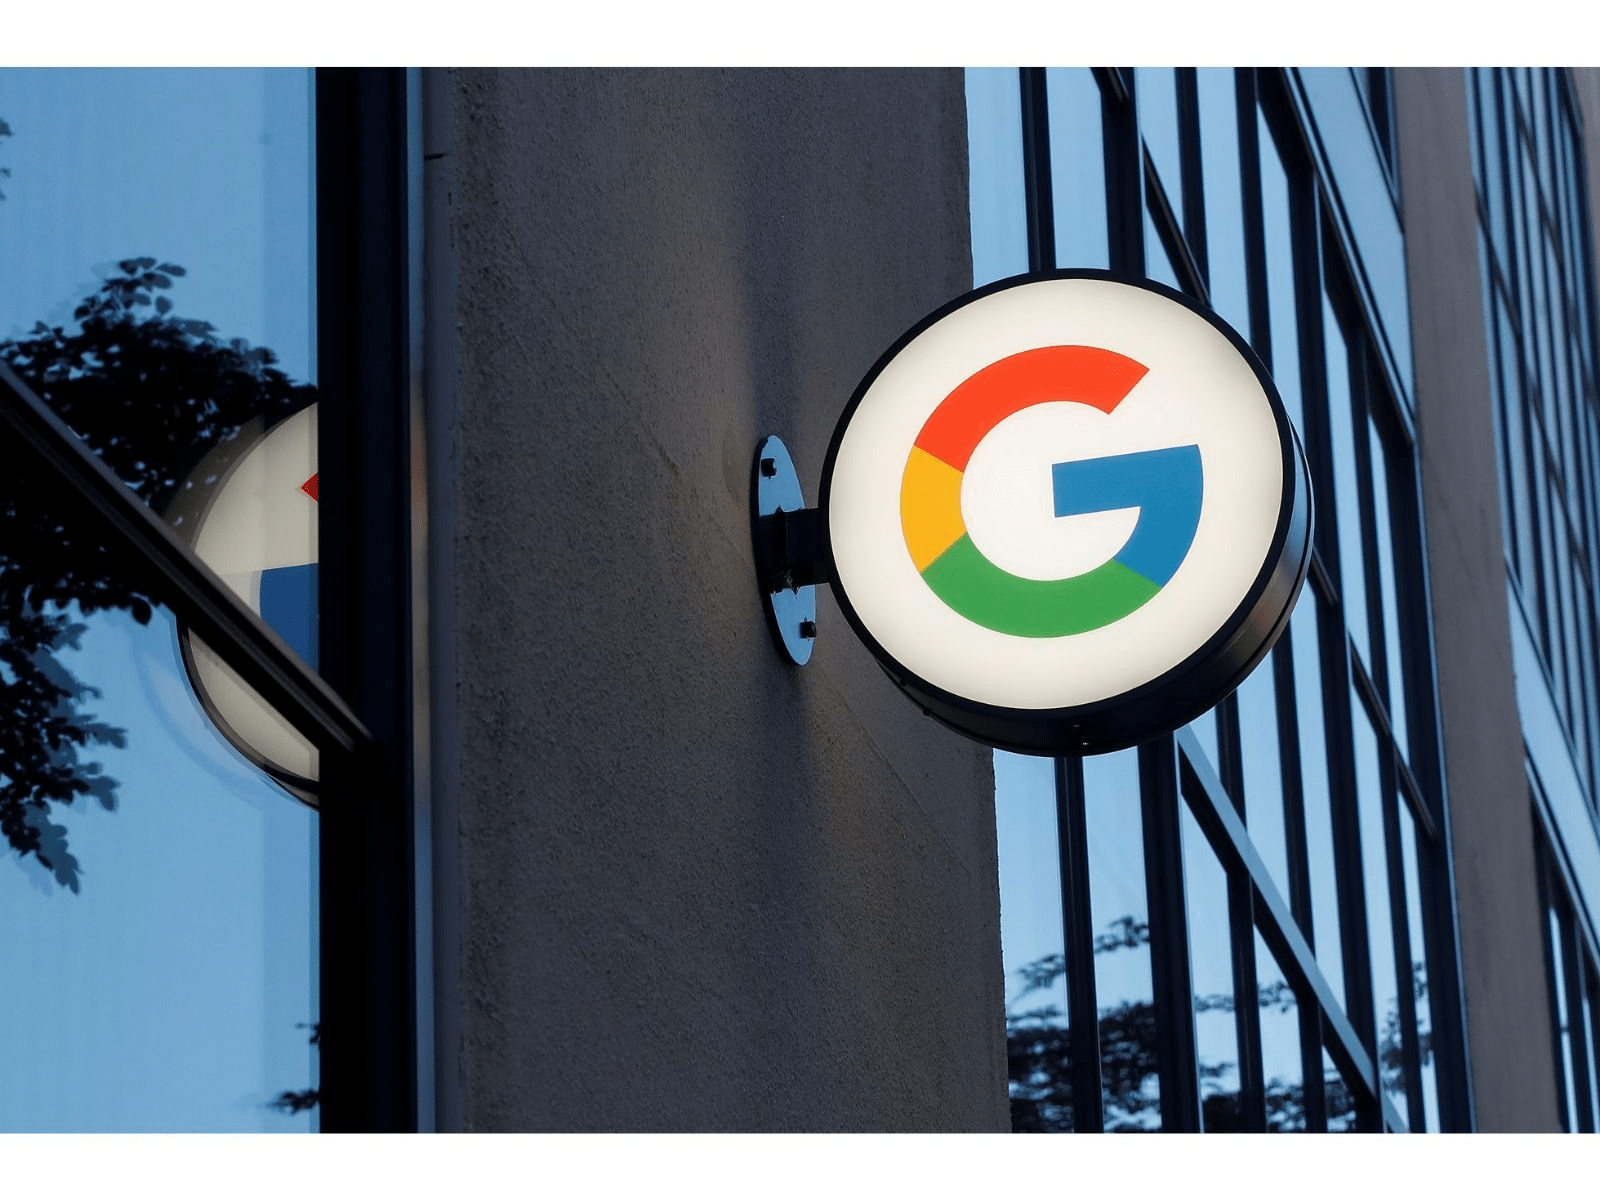 Google's new billing system violates the CCI Order, exploring all legal options to challenge it: ADIF